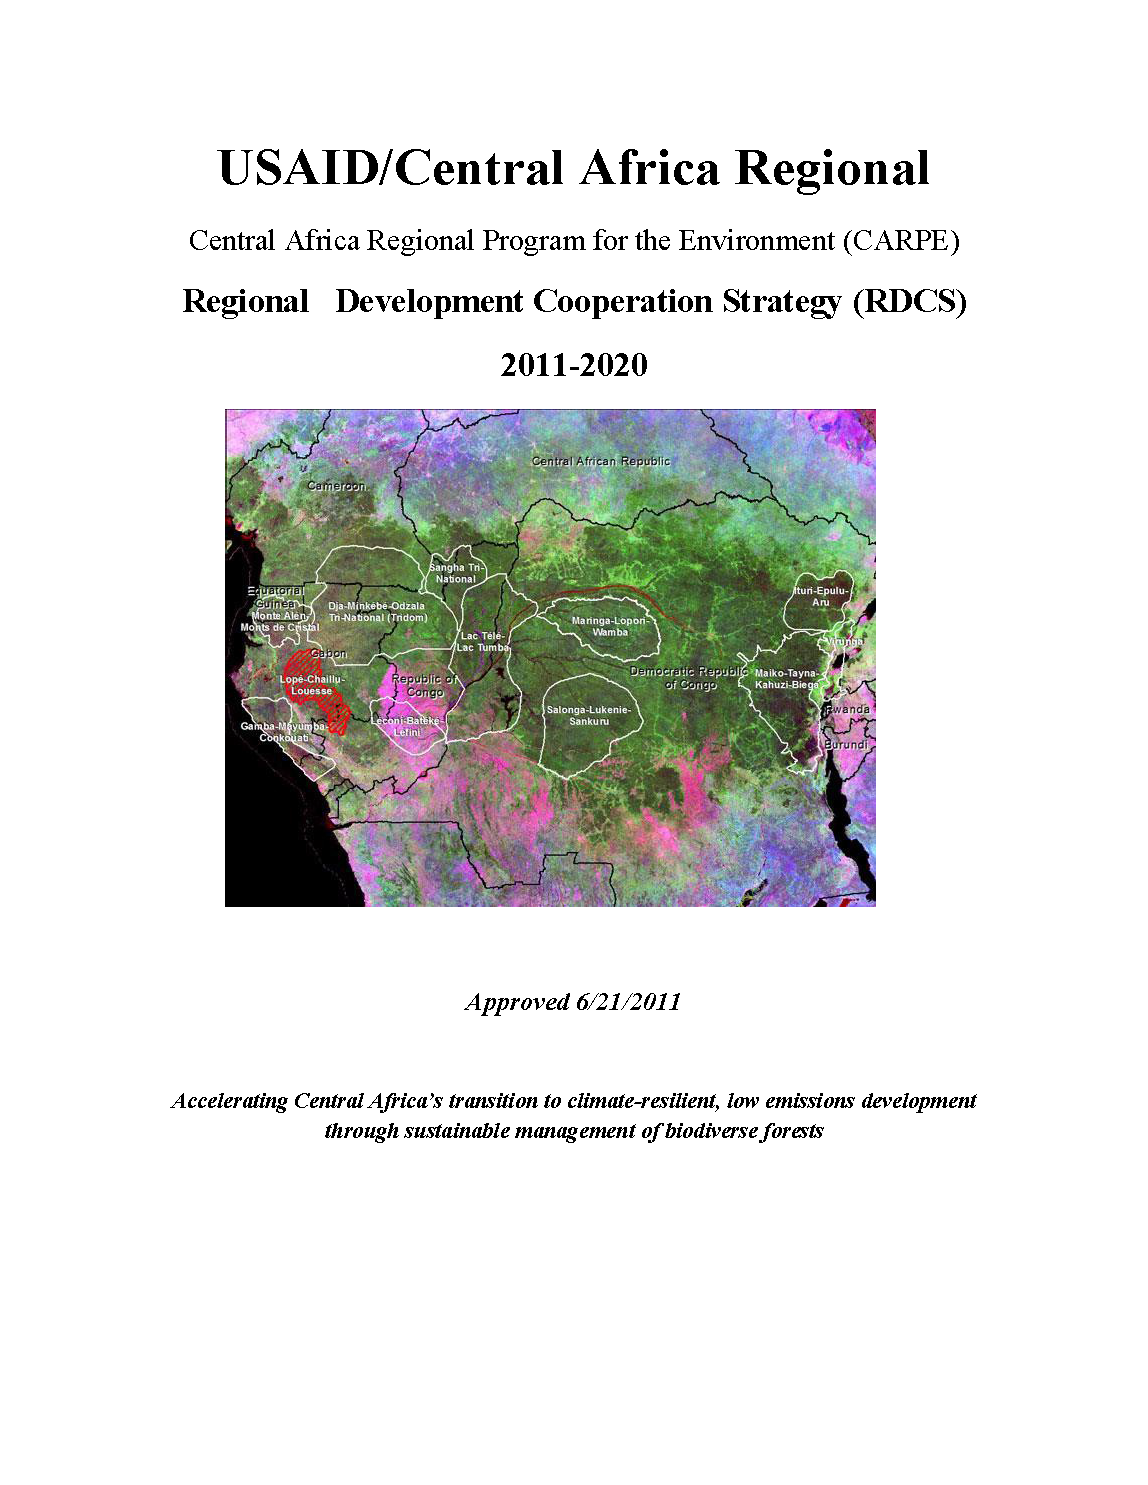 USAID/Central Africa Regional Program for the Environment (CARPE) Regional Development Cooperation Strategy 2011-2020